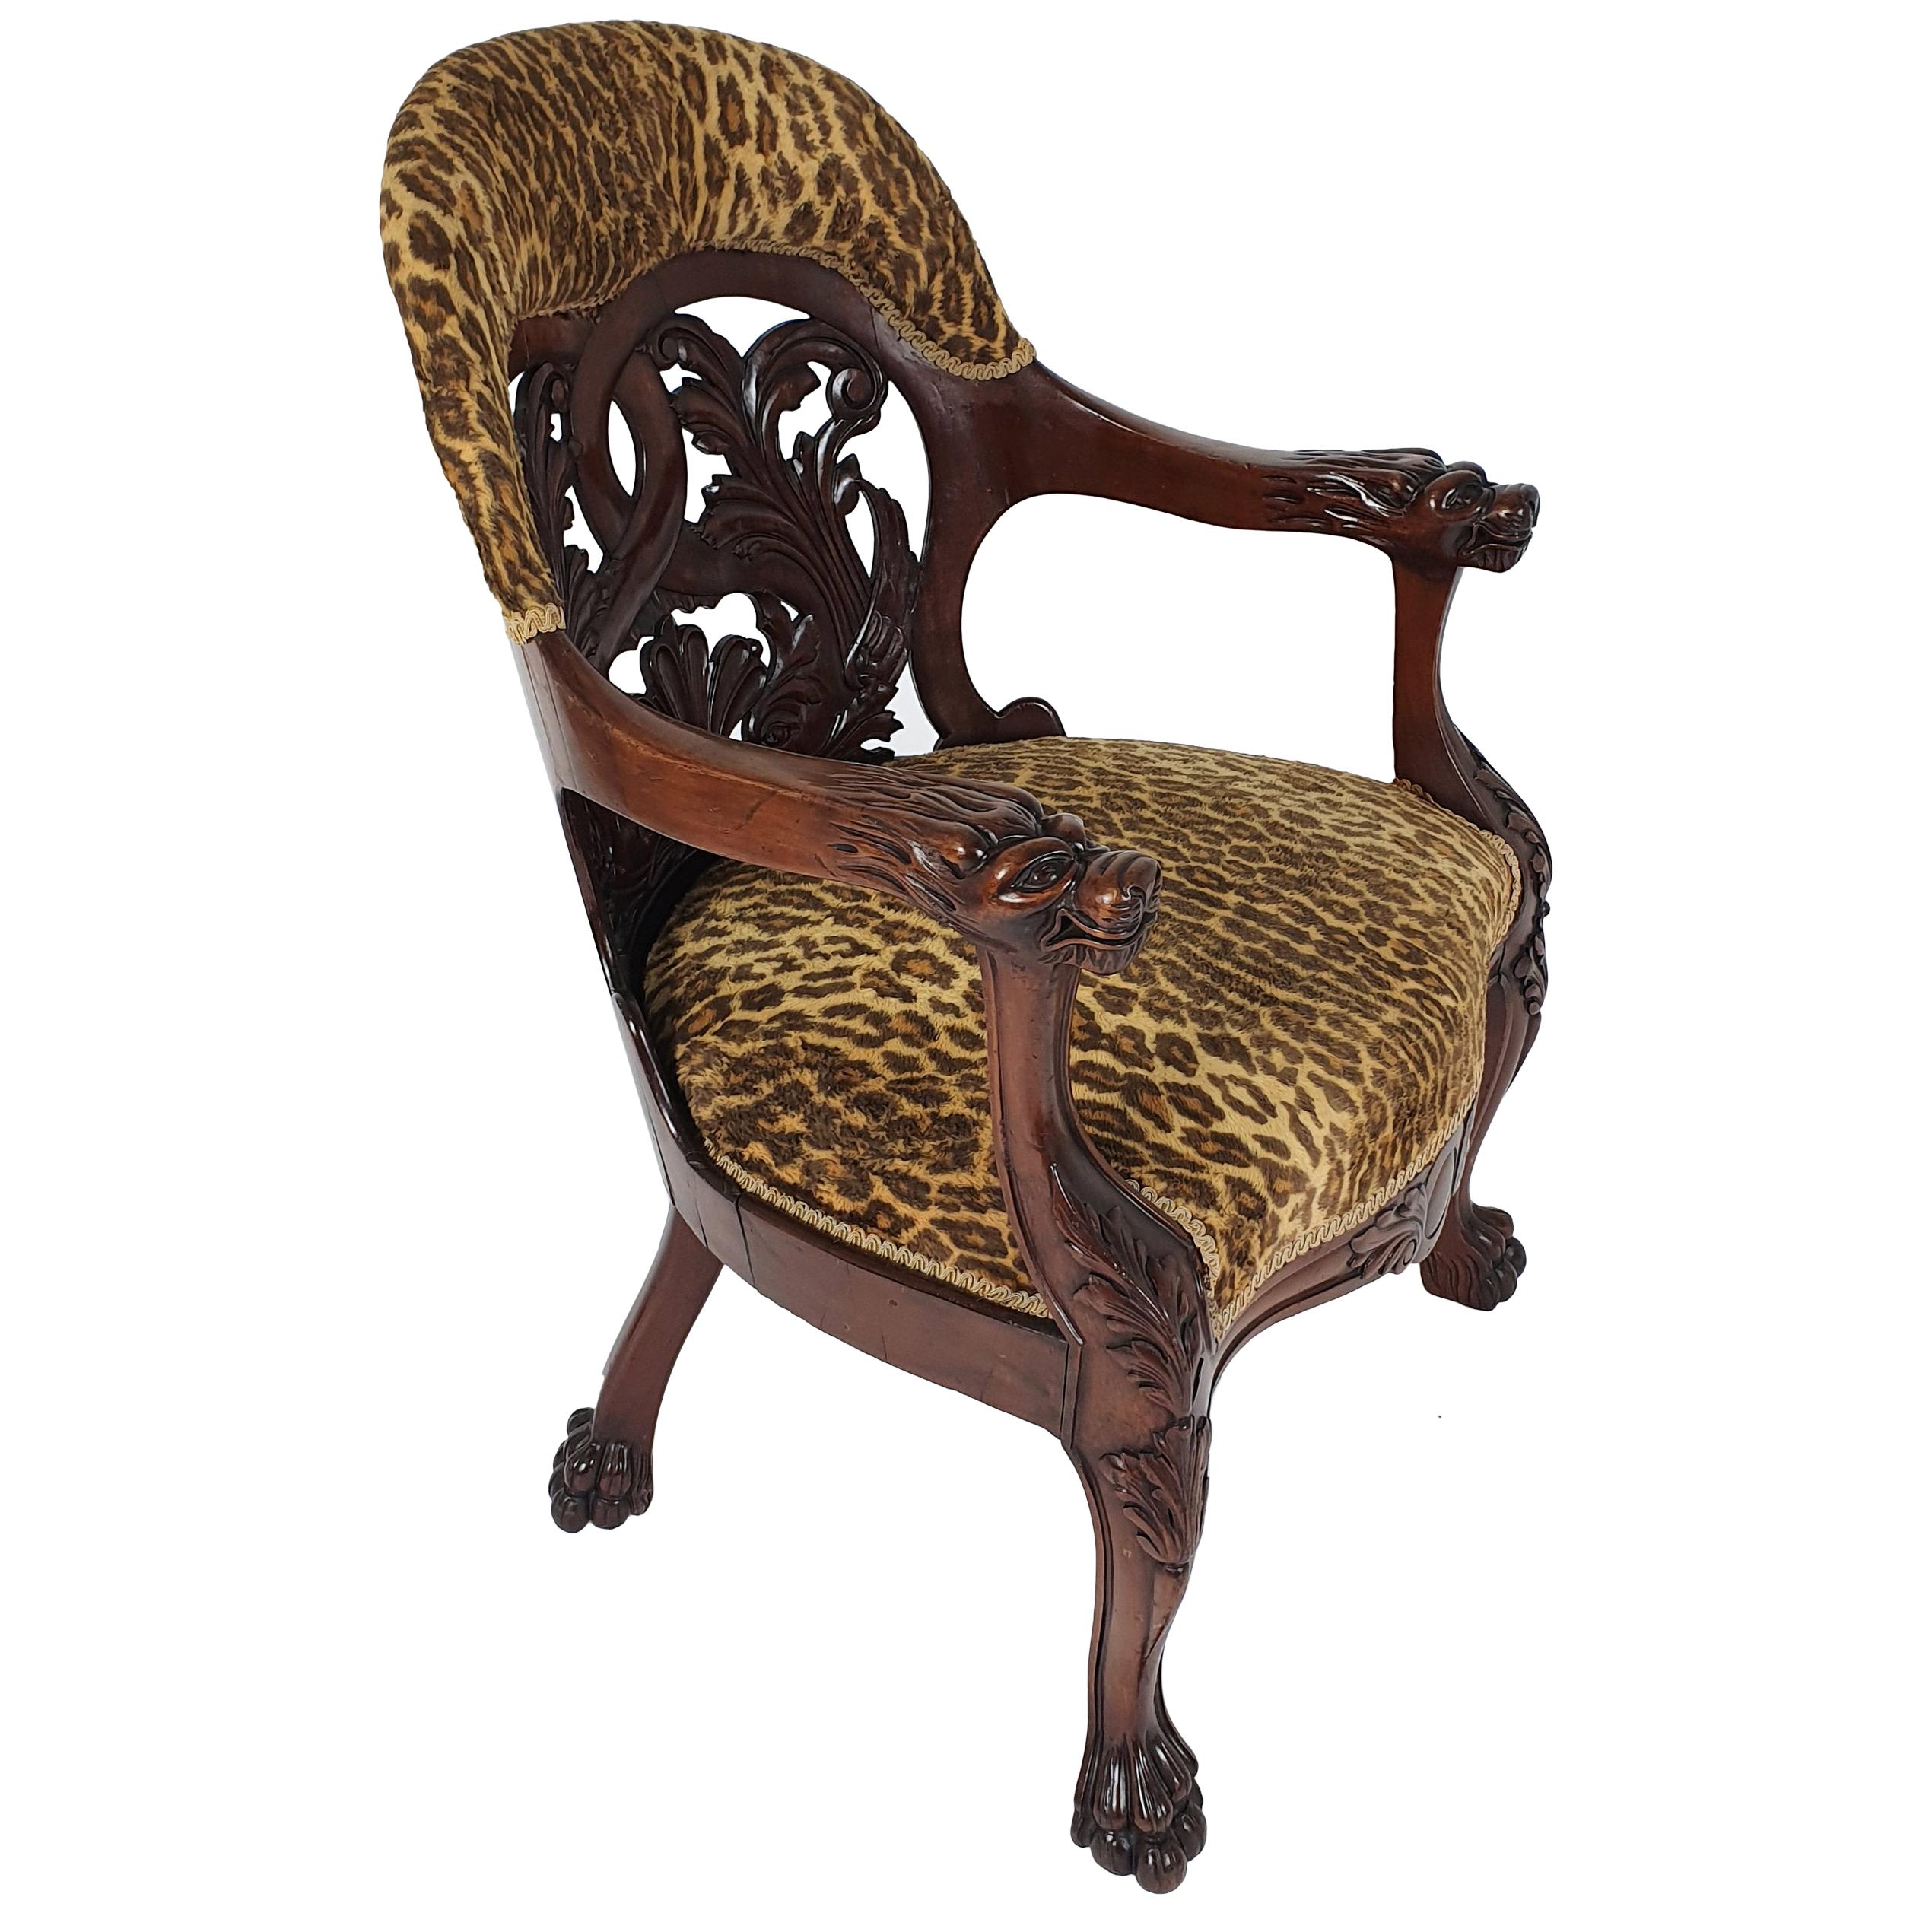 Mid-19th Century French Carved Walnut Desk Chair For Sale